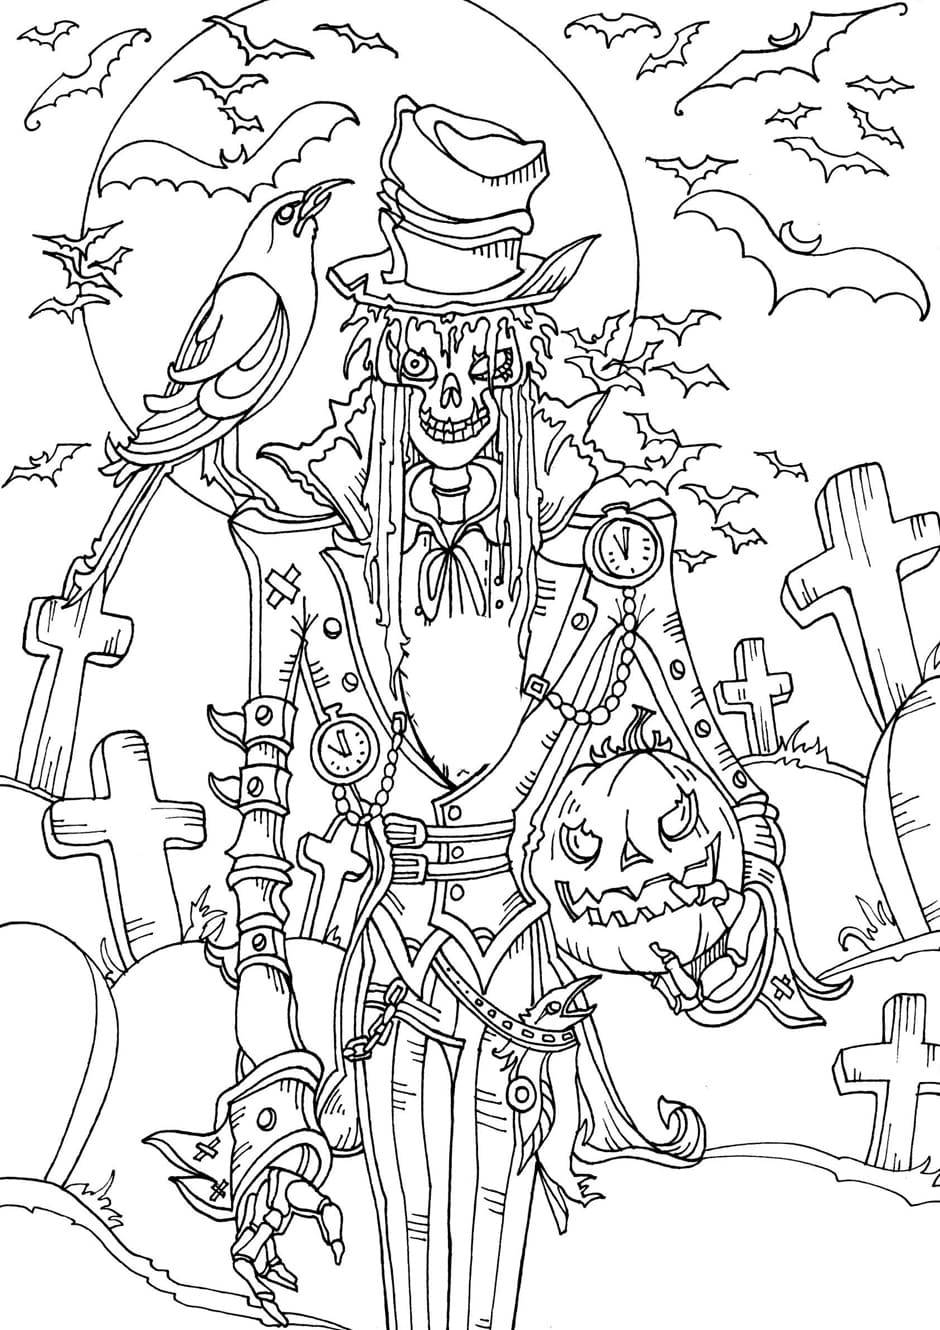 Animated skeleton coloring page